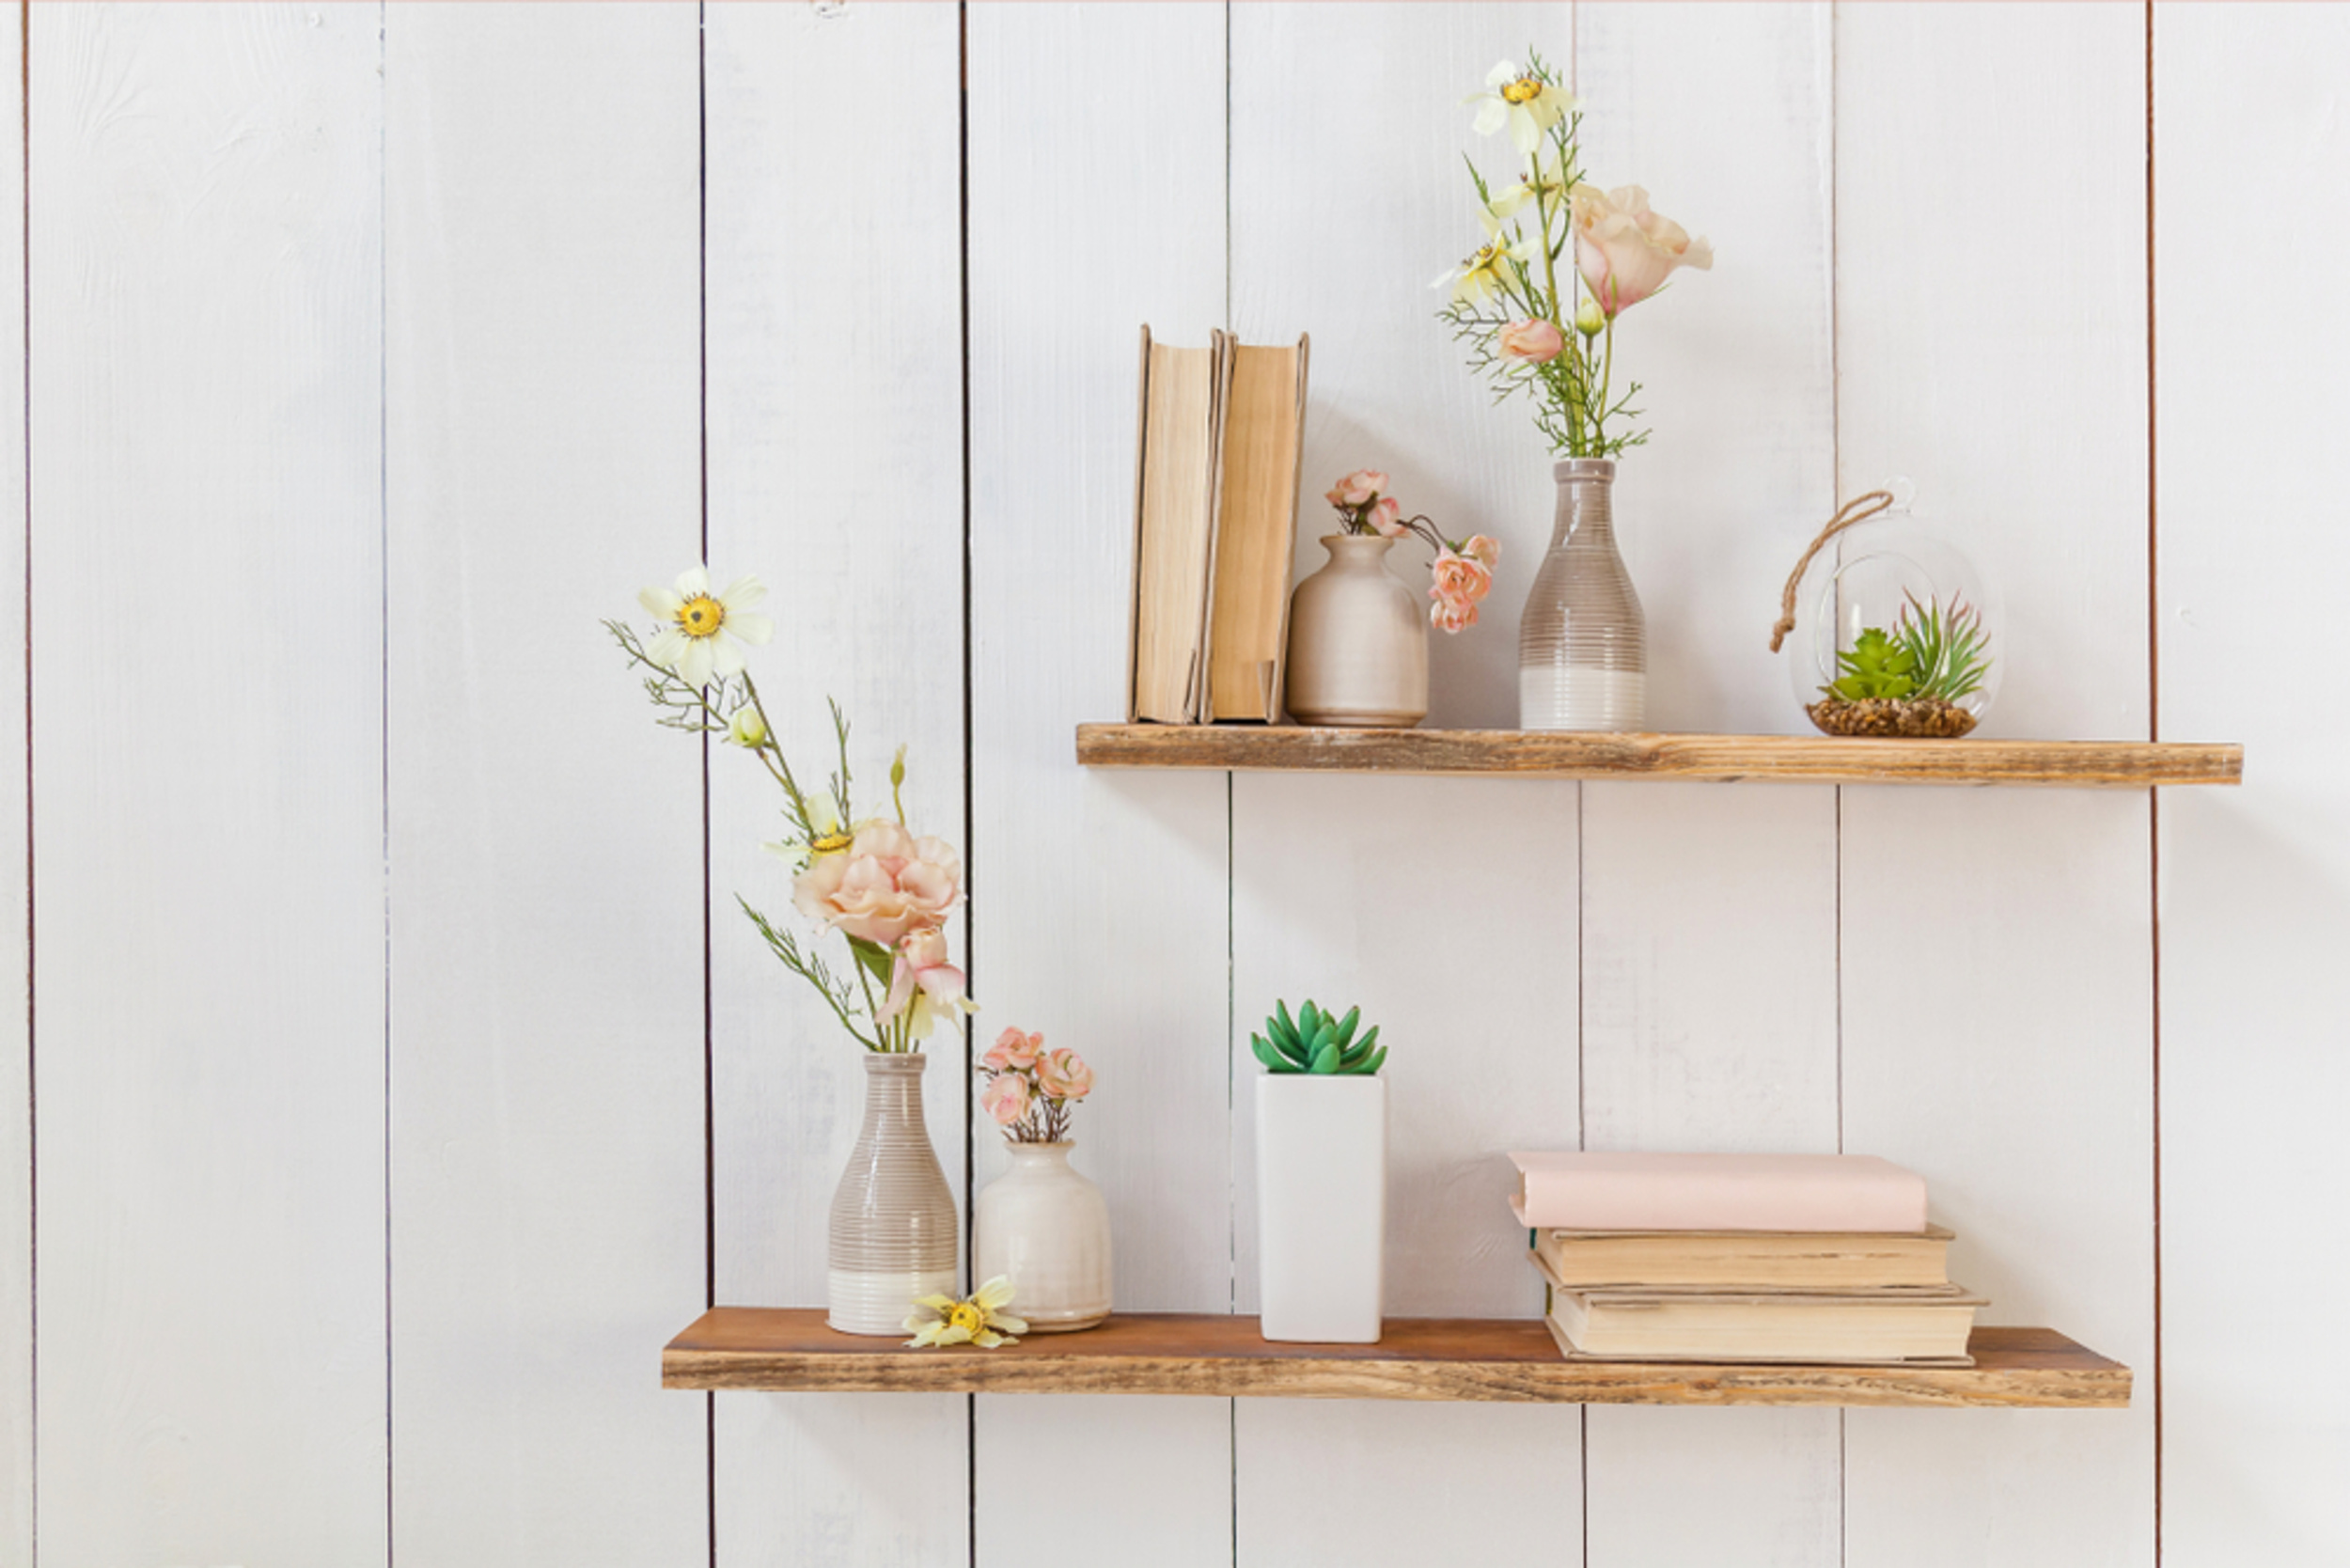 <p>With a few boards, some brackets, and screws, making shelves at home couldn't be easier. If your space lacks storage, use these DIY shelves to add chic storage, or as a space to display decorative items and add visual interest to your walls. </p><p><a href='https://www.msn.com/en-us/community/channel/vid-cj9pqbr0vn9in2b6ddcd8sfgpfq6x6utp44fssrv6mc2gtybw0us'>Follow us on MSN to see more of our exclusive lifestyle content.</a></p>